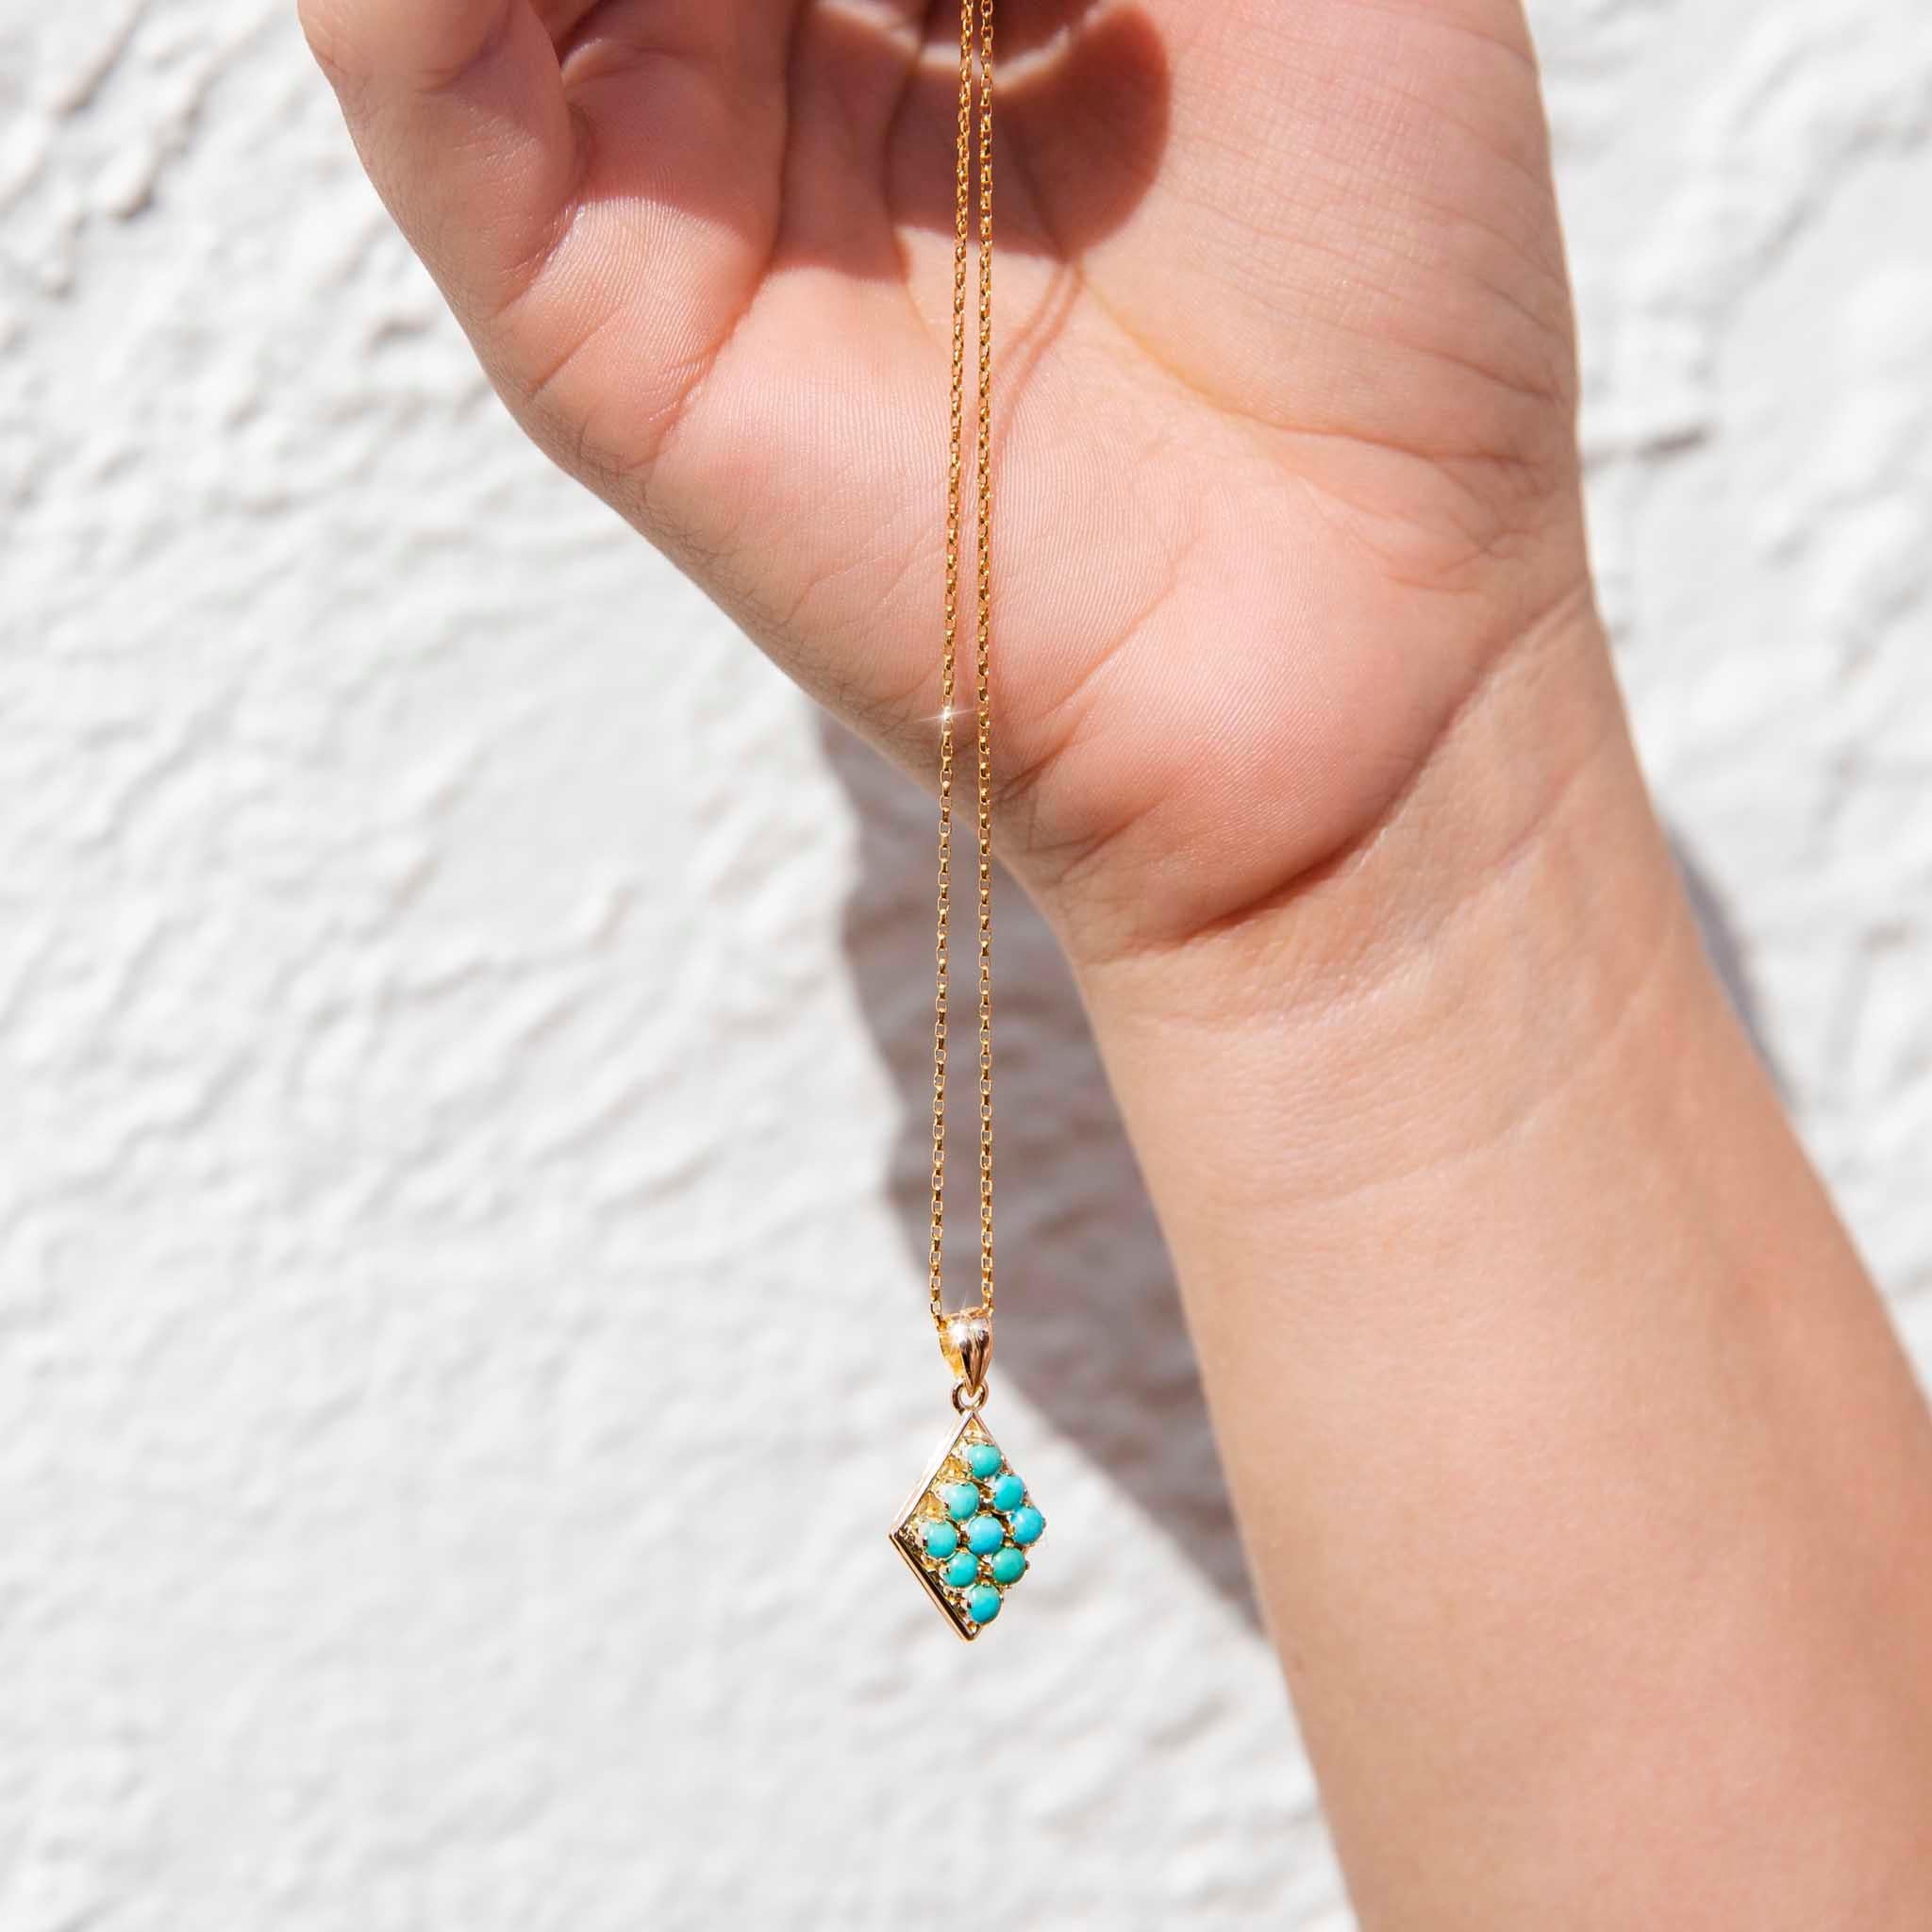 Vintage Circa 1970s 14 Carat Yellow Gold Turquoise Bead Pendant and Chain In Good Condition For Sale In Hamilton, AU